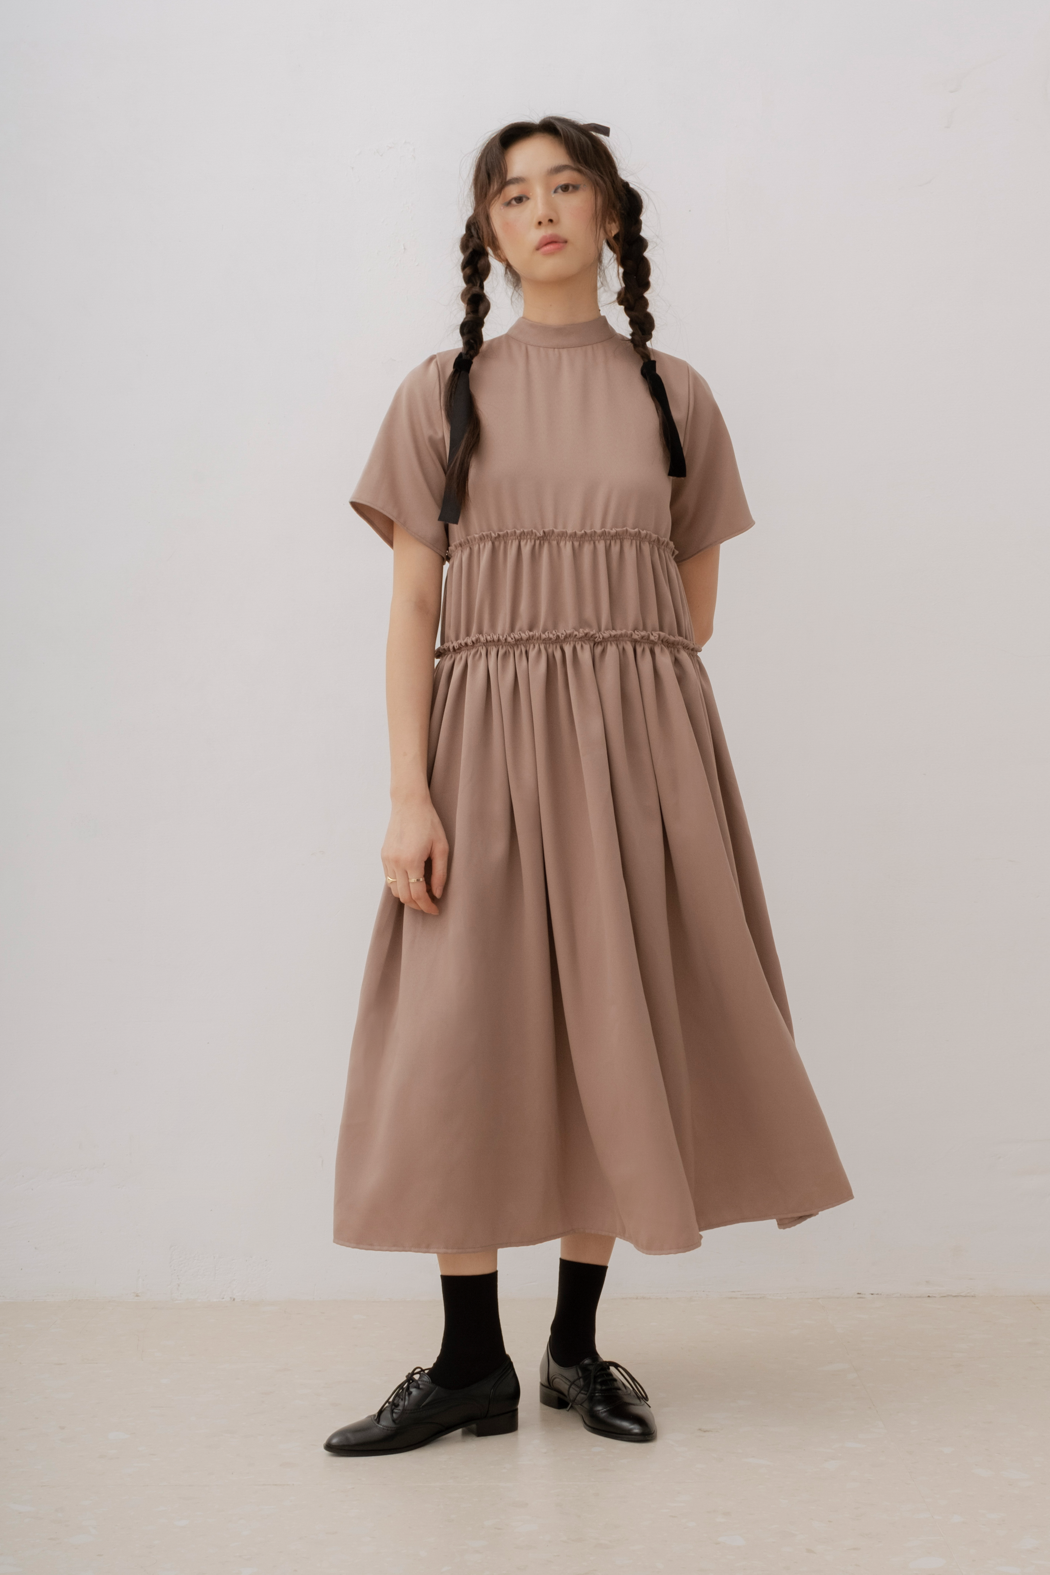 Nais Dress in Taupe (40% Off)